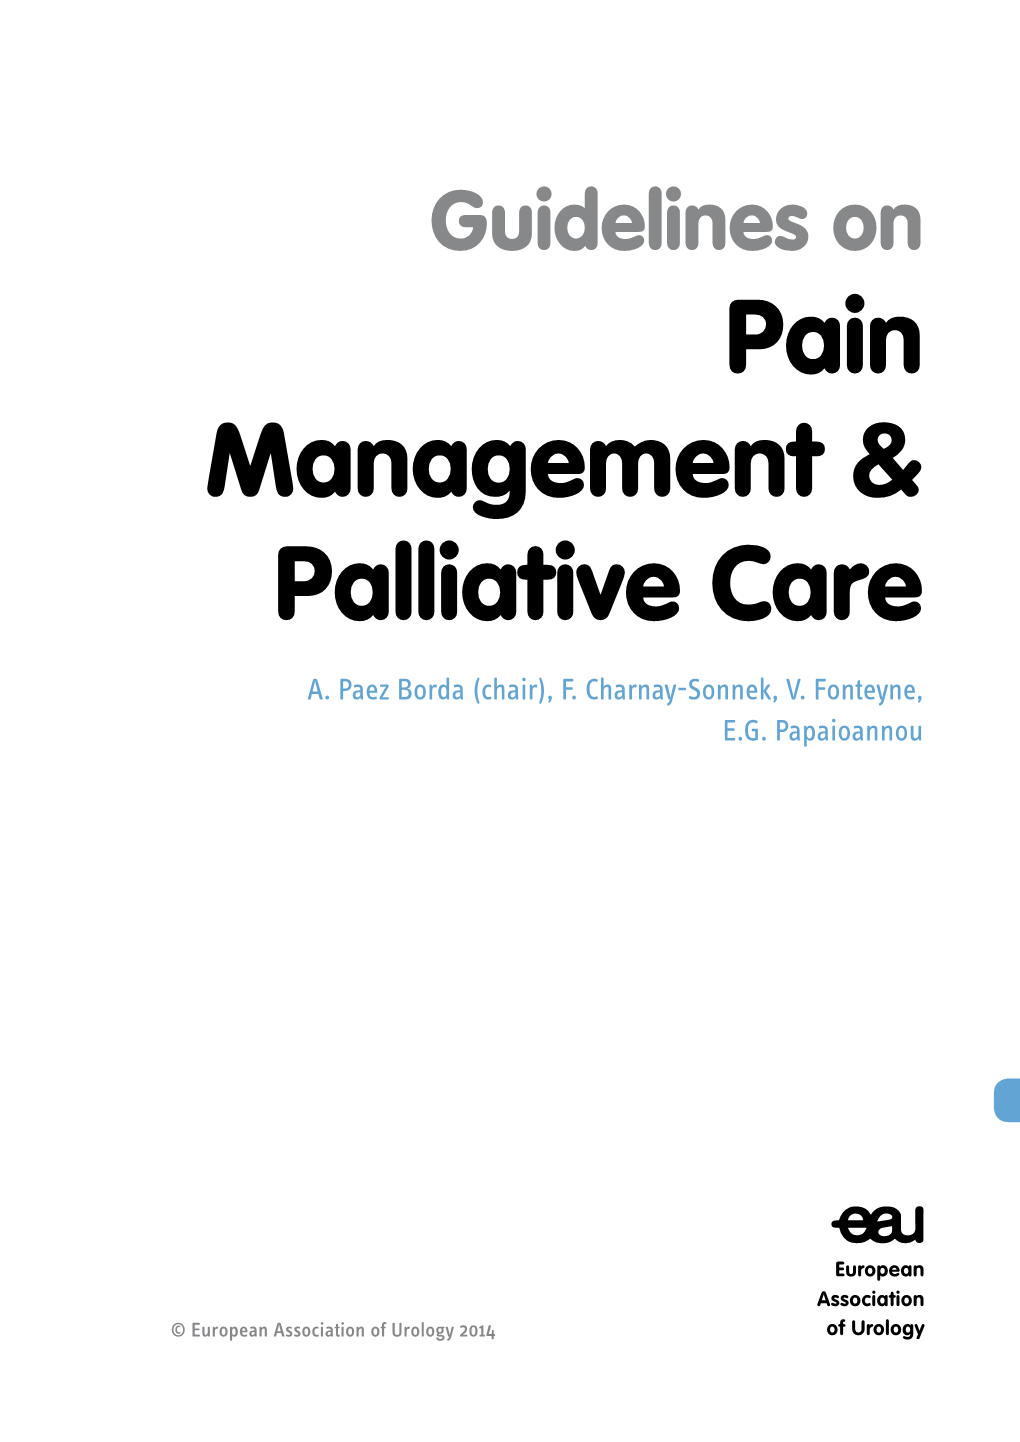 Guidelines on Pain Management and Palliative Care